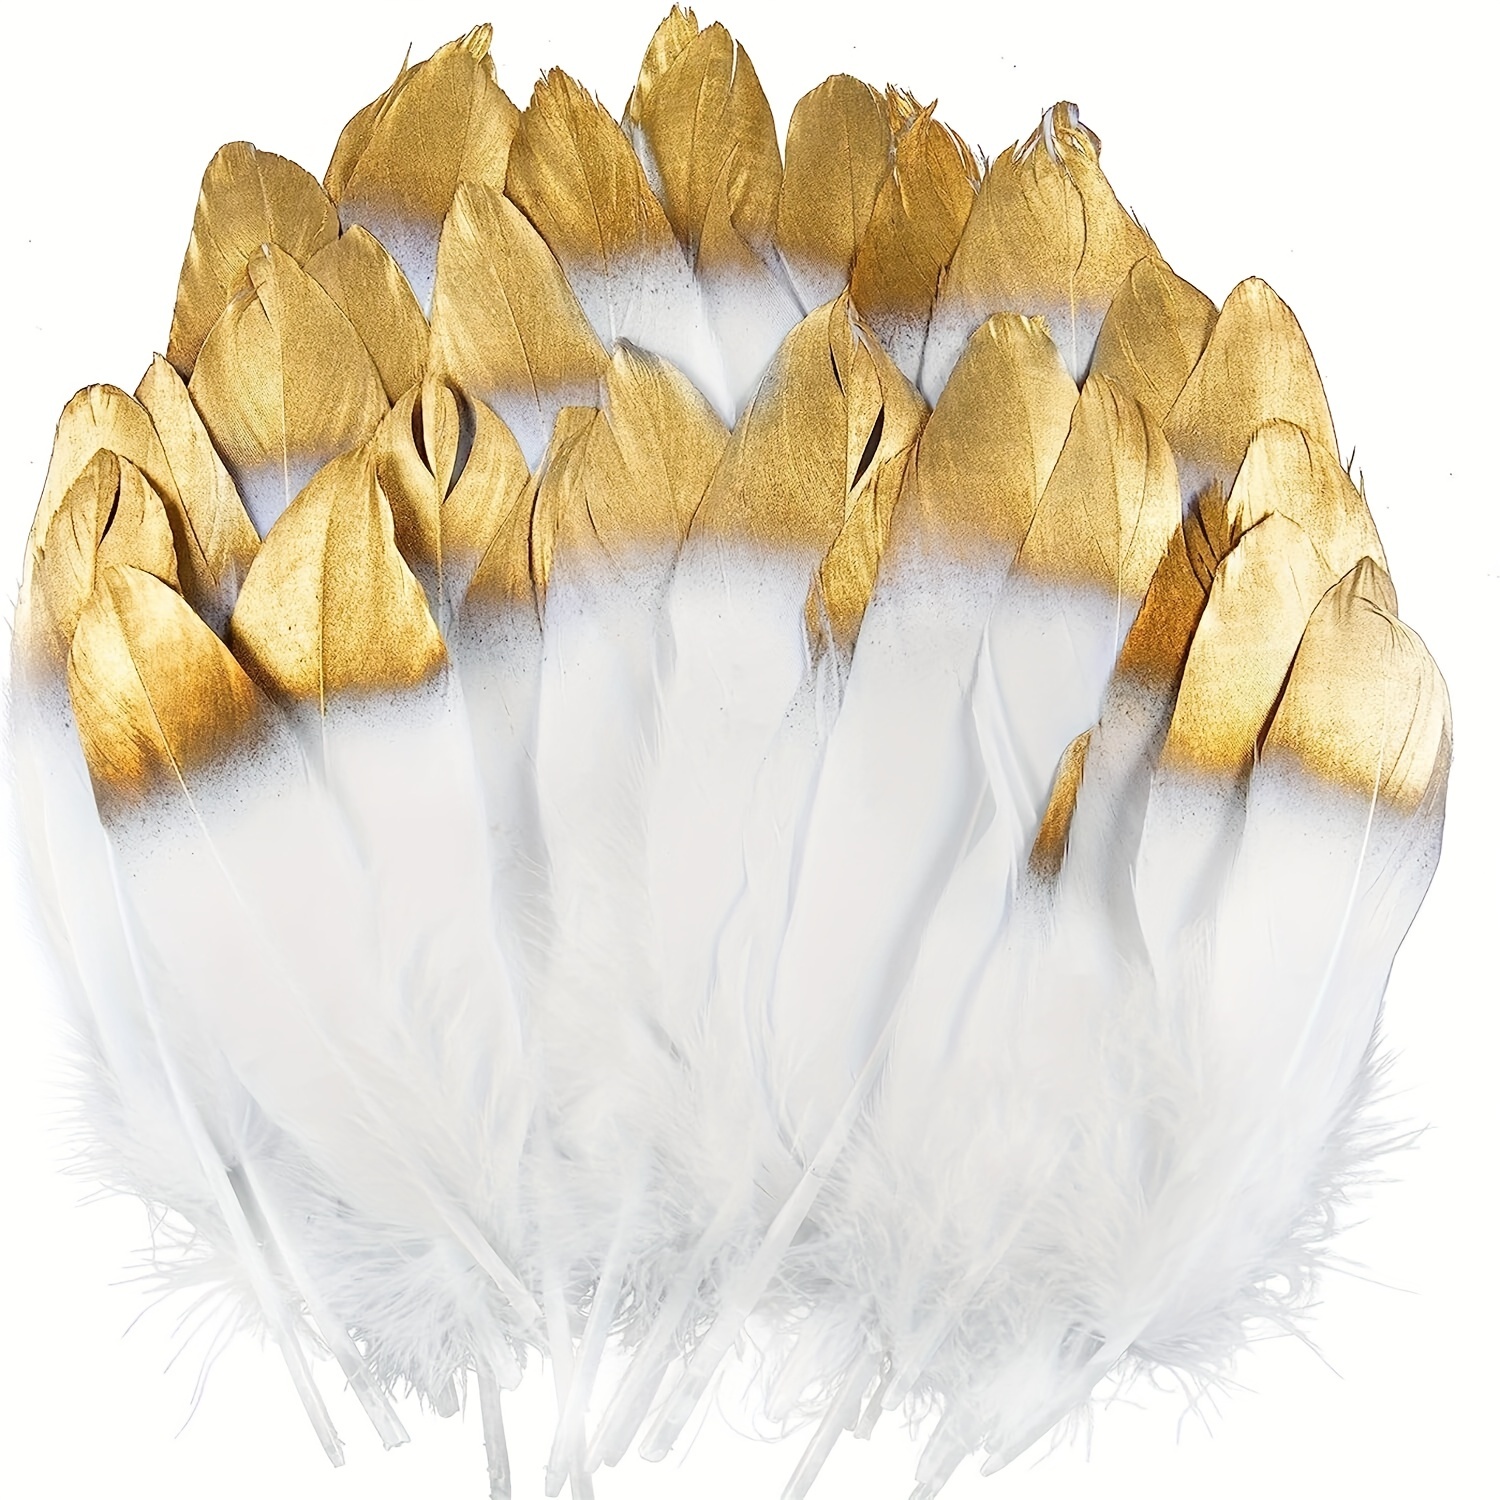 Ballinger Natural White Goose Feathers - 120Pcs 6-8 Inch Bulk Feathers for  Crafts, Wedding centerpieces, Angel Wings and Dream Catcher